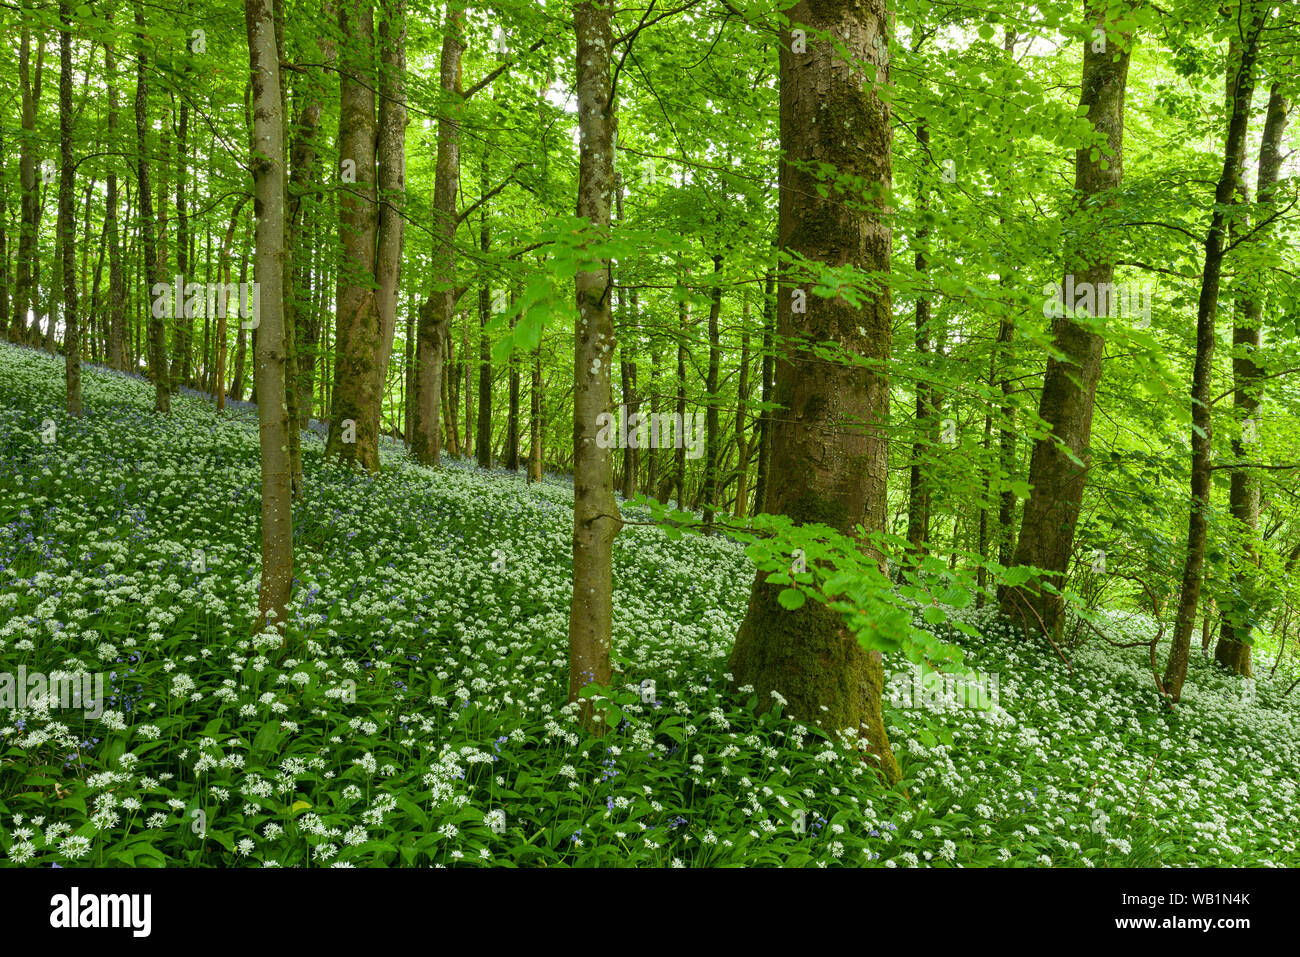 Ramsons in legno lungo il quale costituisce parte del Cheddar Gorge complesso in Mendip Hills, Somerset, Inghilterra. Foto Stock